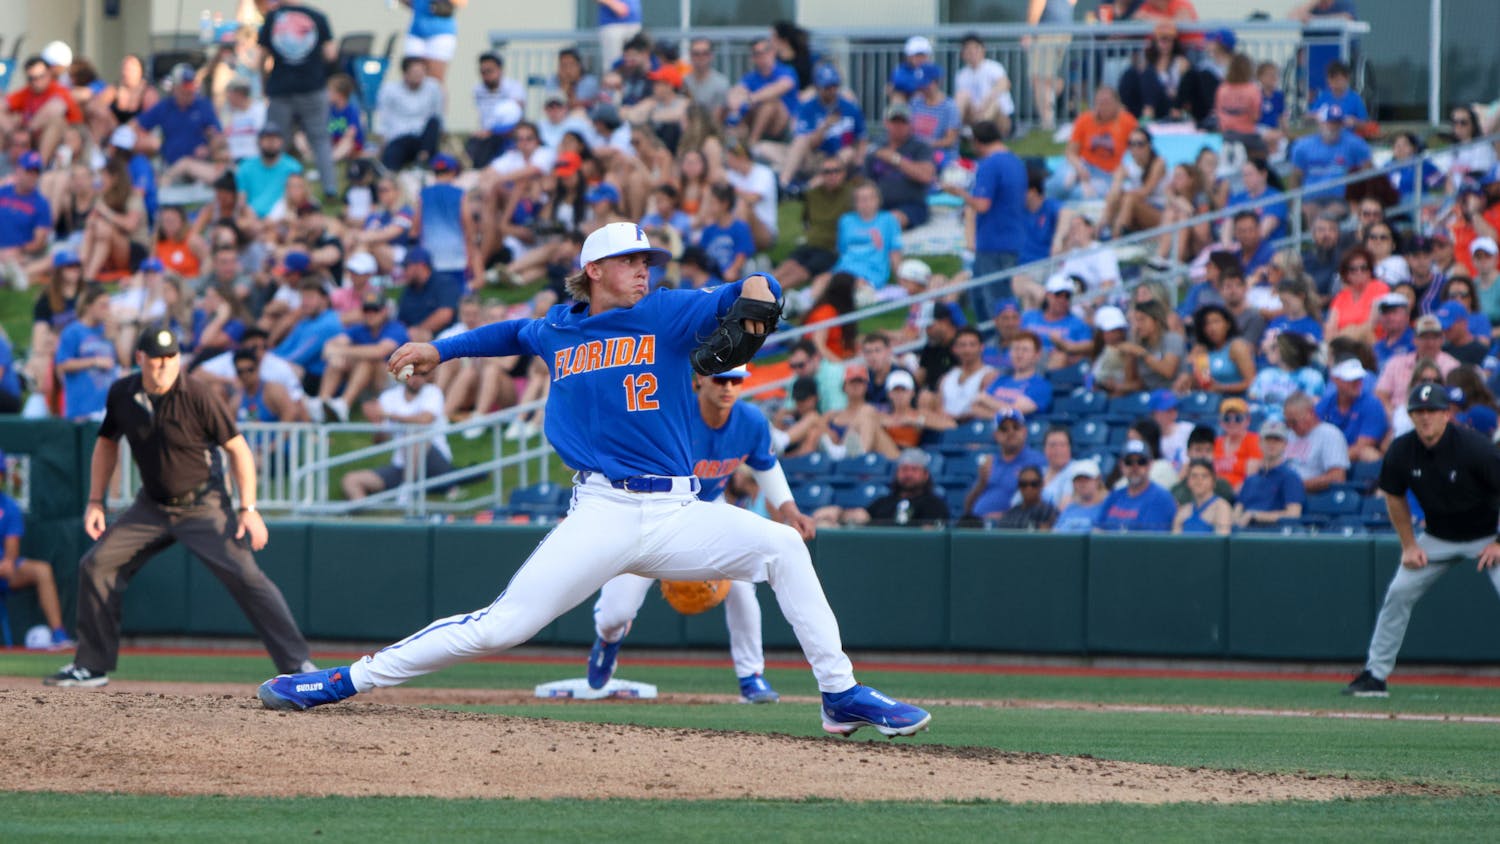 Florida pitcher Hurston Waldrep throws a pitch in the Gators' 13-3 win over the Cincinnati Bearcats Feb. 25, 2023.